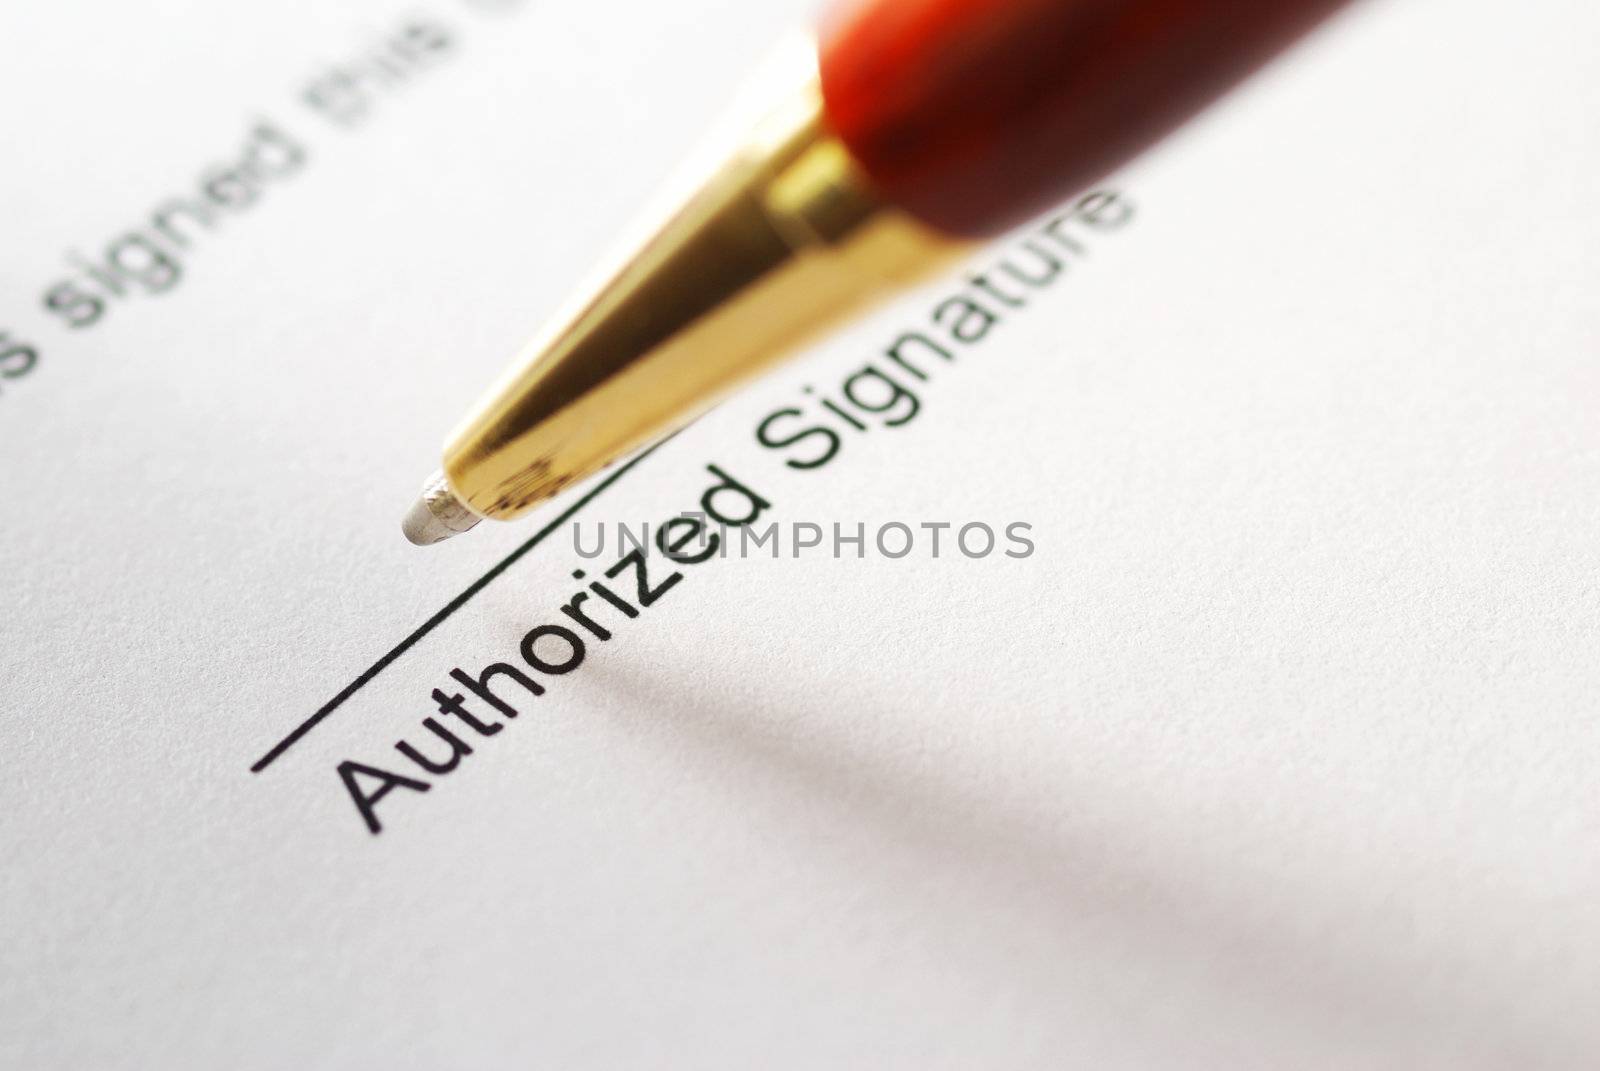 Signing a contract. Shallow depth of field.